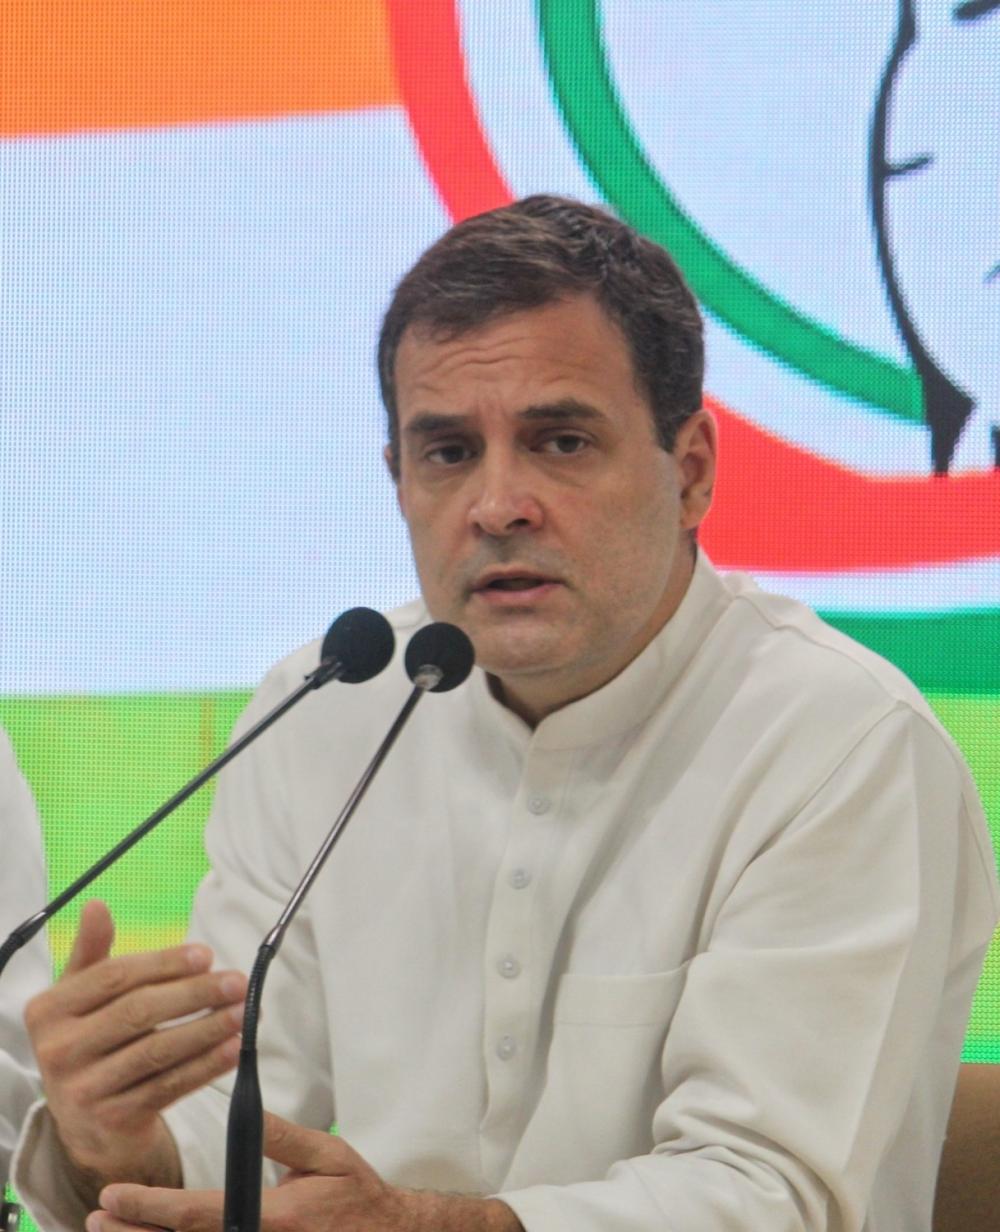 The Weekend Leader - Congress to raise Pegasus issue in winter session: Rahul Gandhi